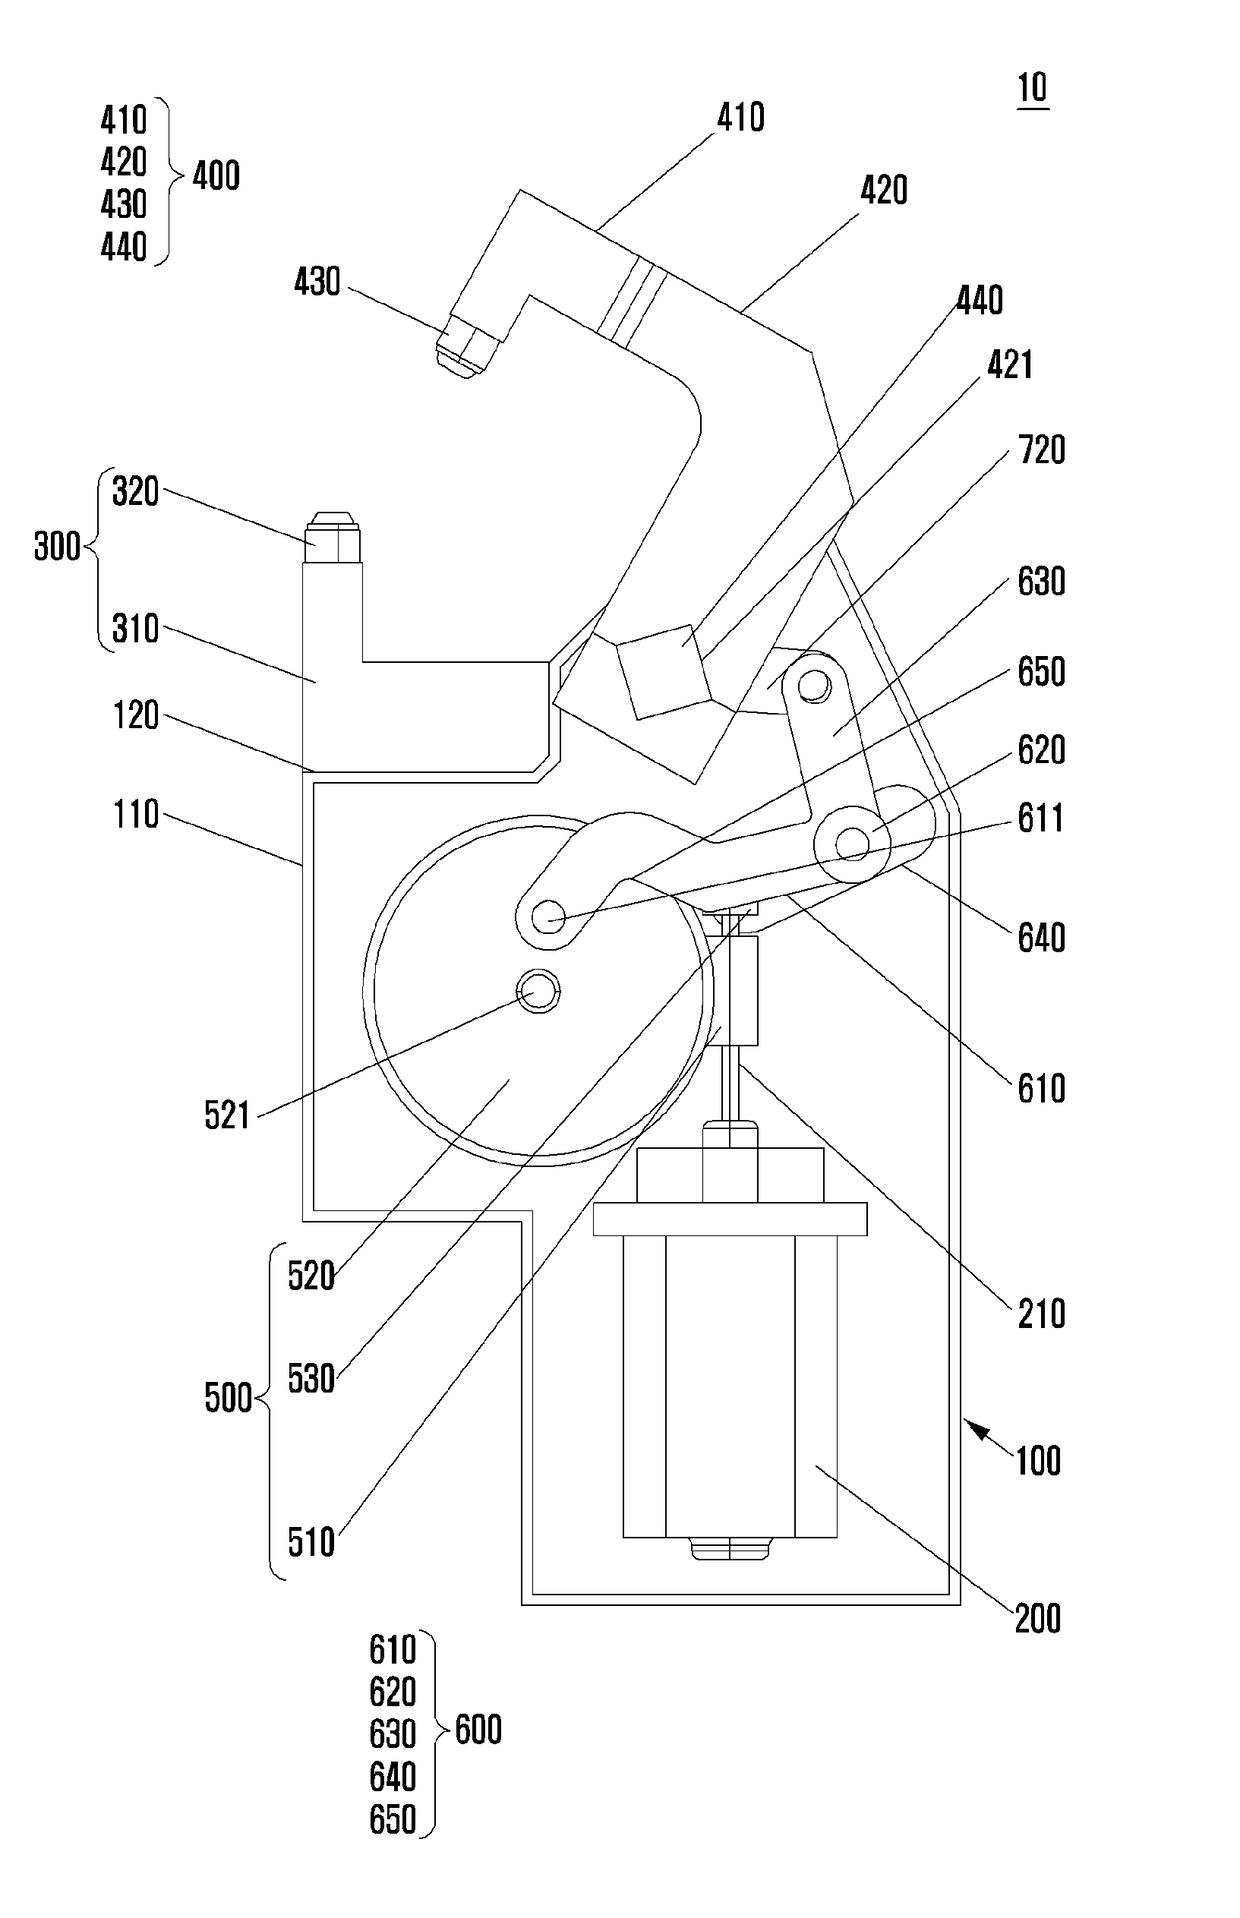 Electrical clamping apparatus